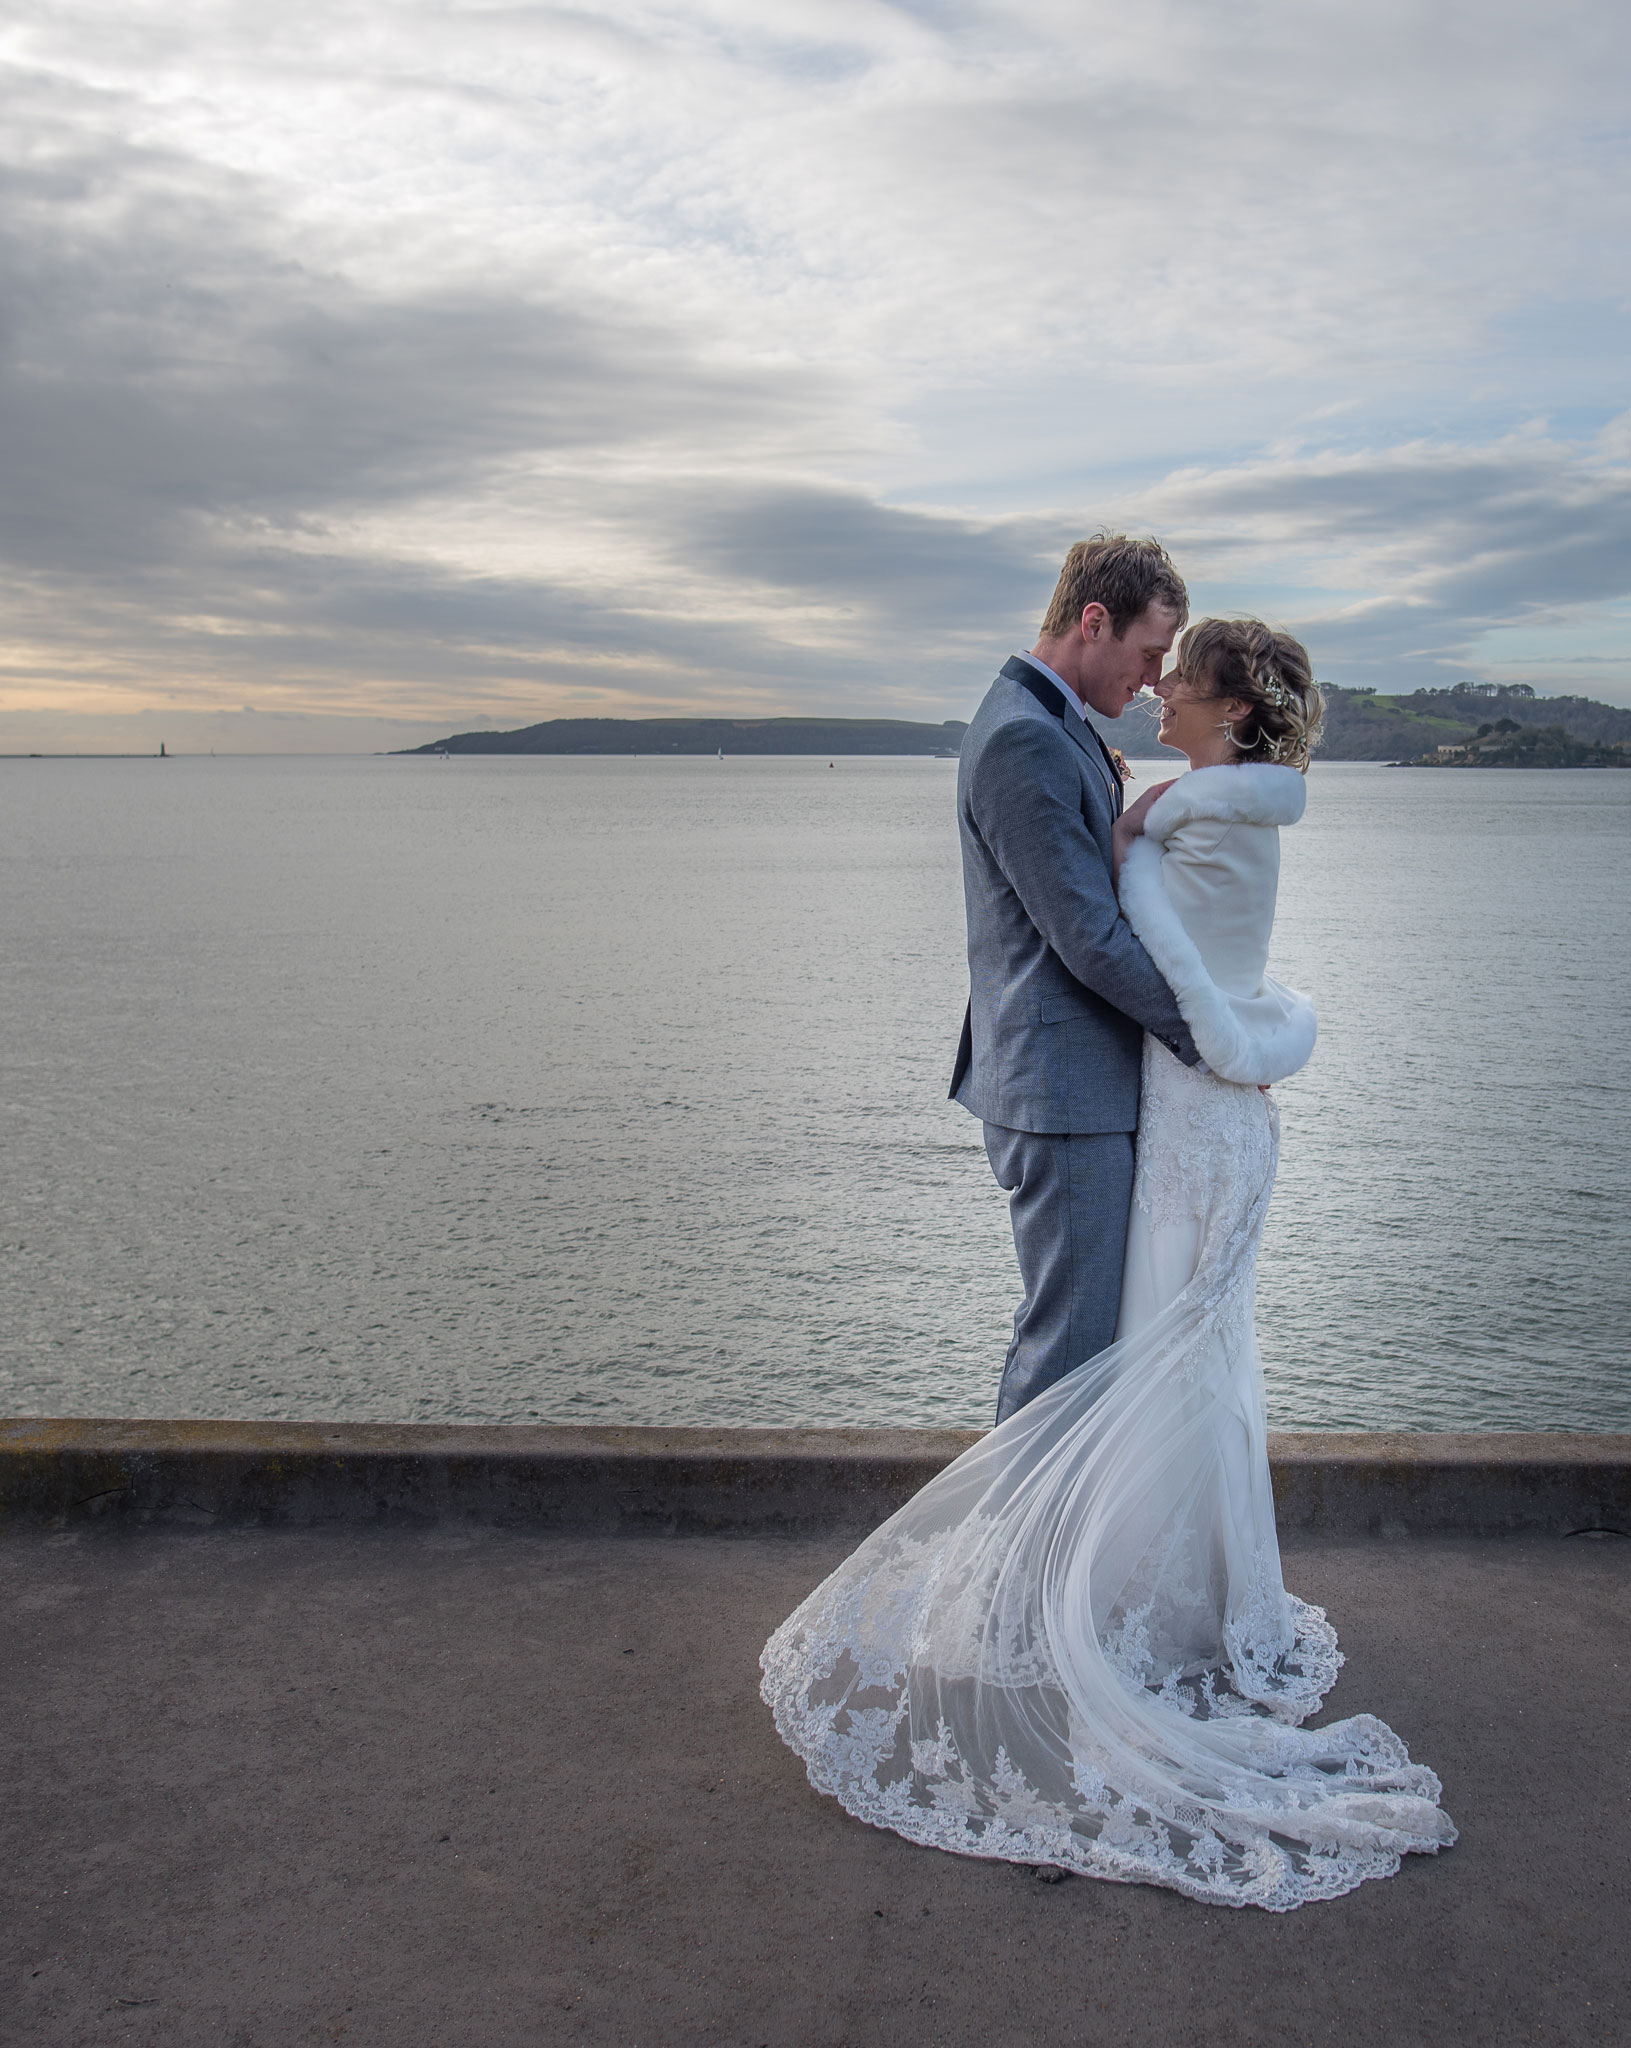 A winter wedding on the stunning Plymouth coast a beautifaul way to end the year